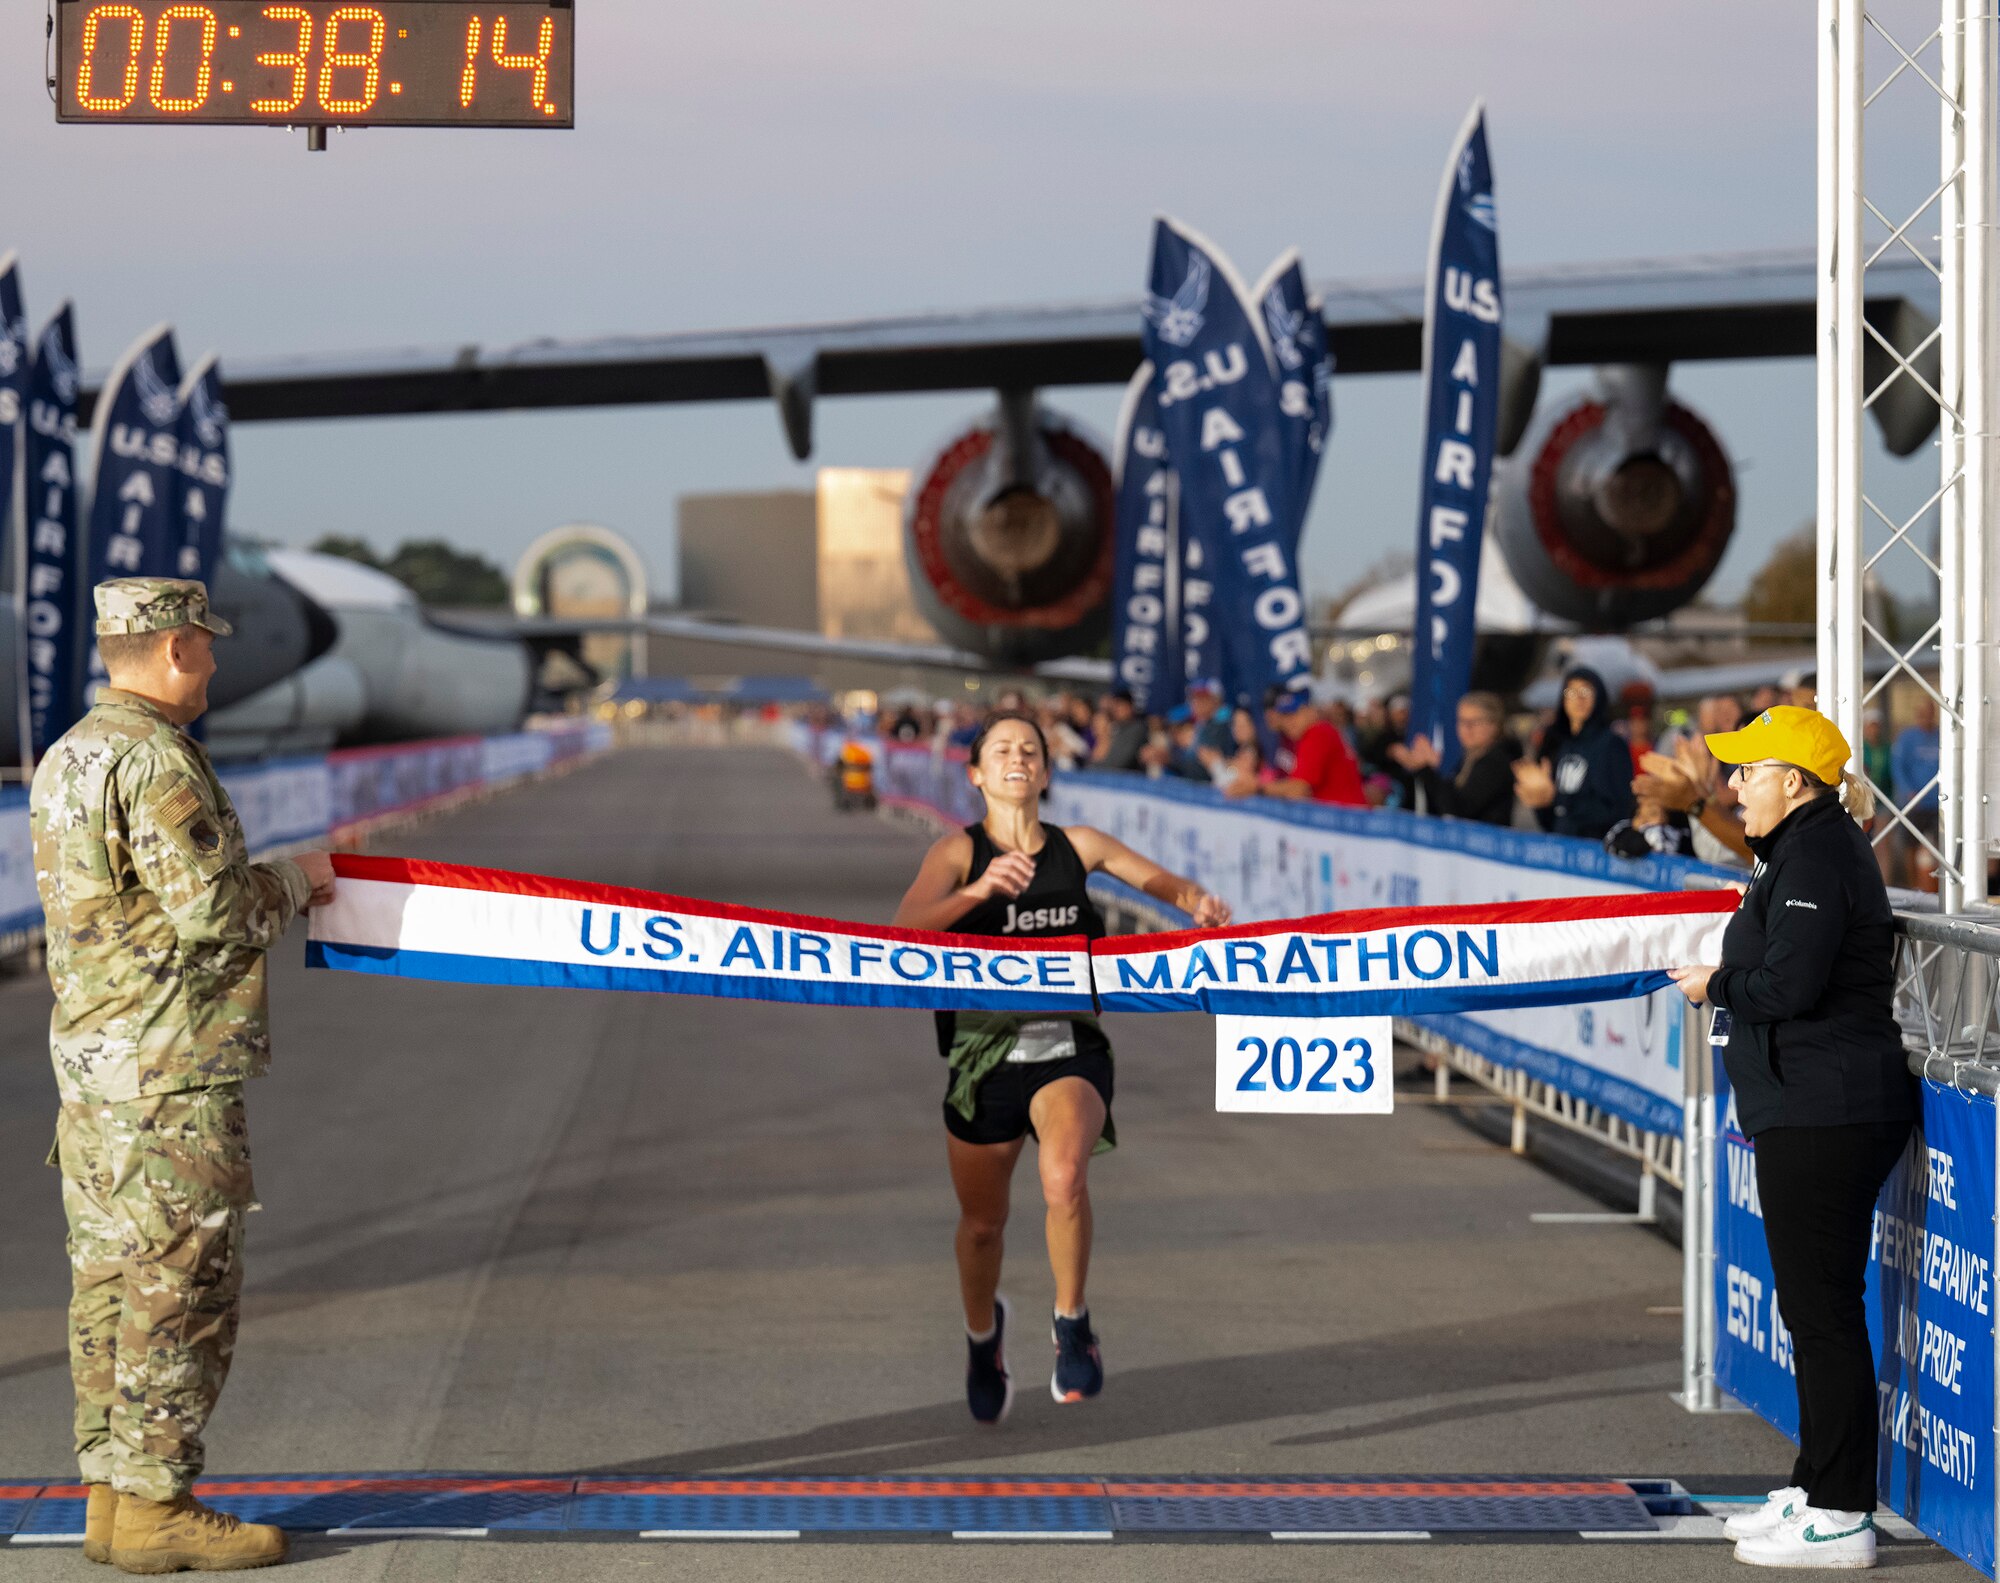 A woman in black athletic clothes raises her arms as she approaches a red, white and blue banner with "U.S. Air Force Marathon" on it.